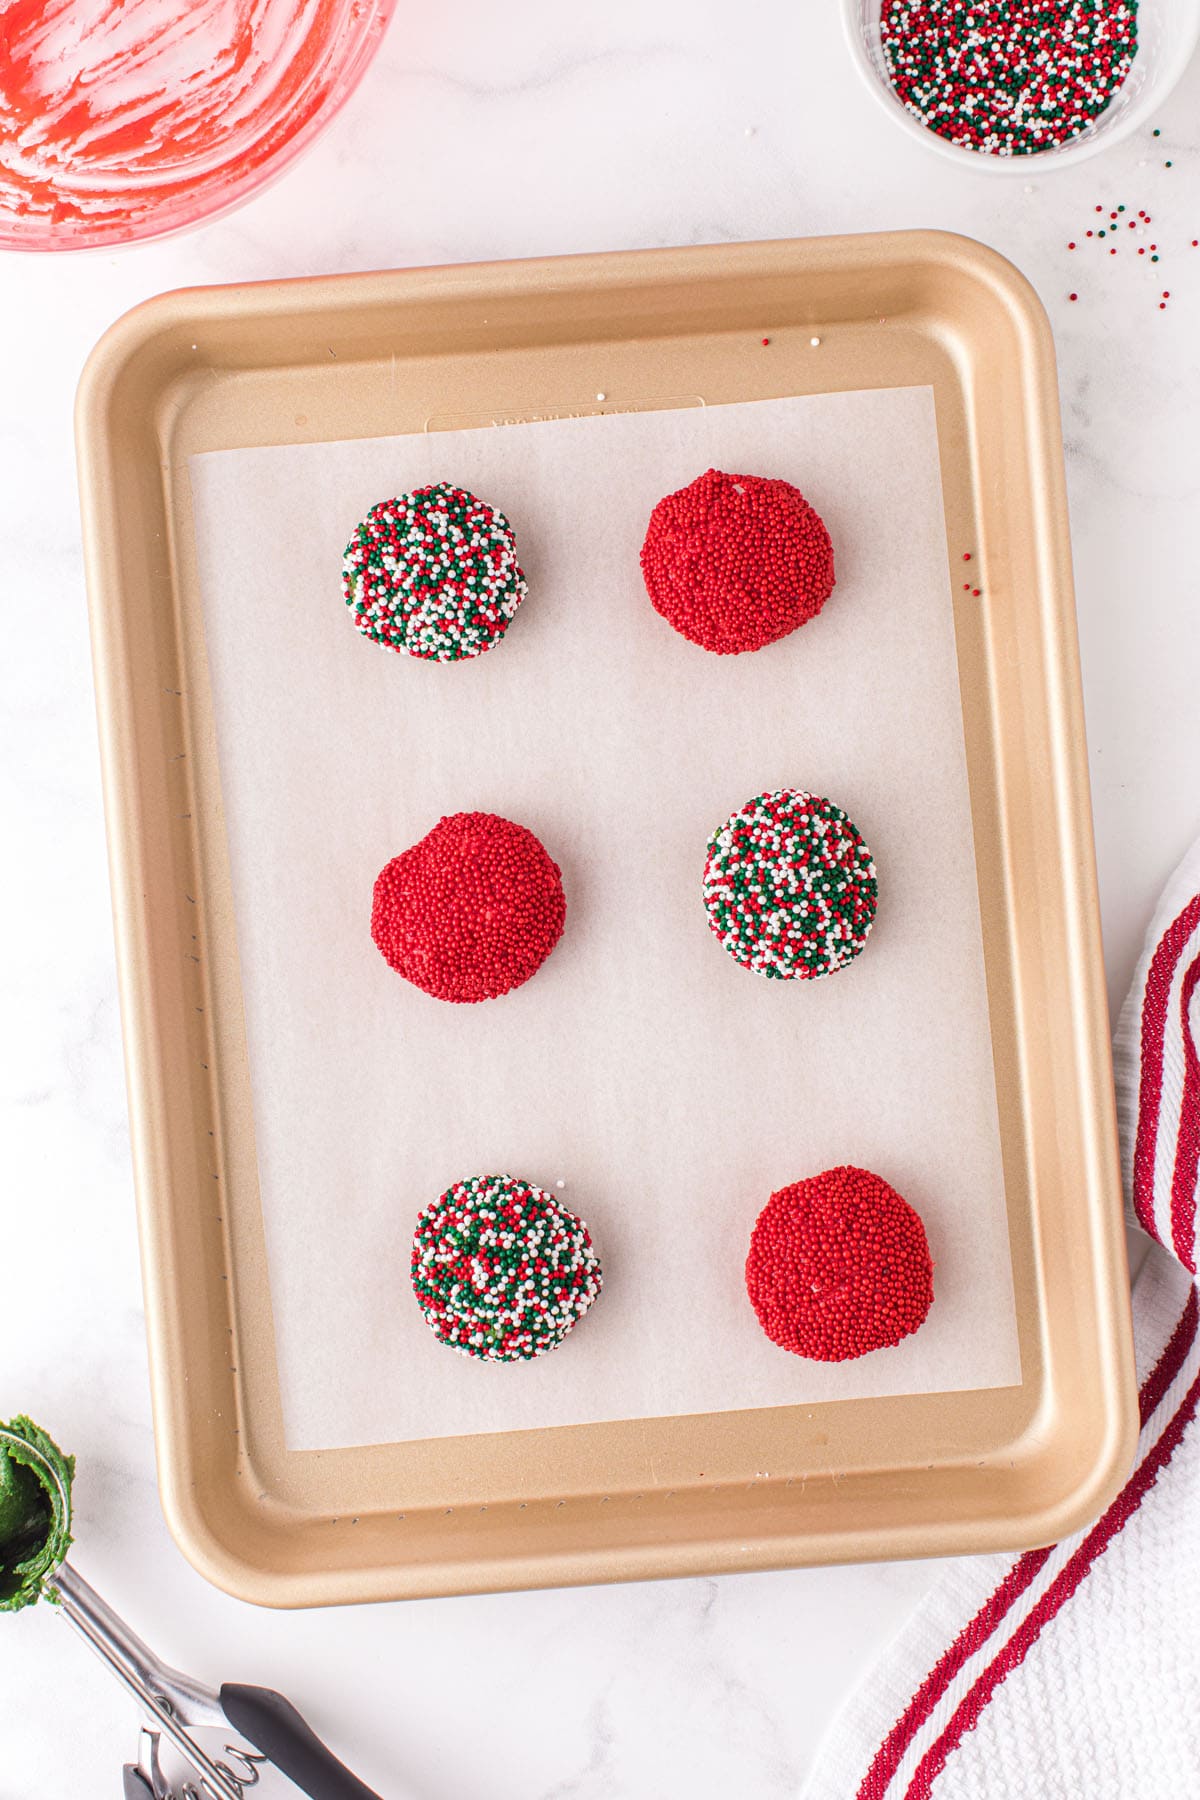 Place sprinkled covered dough balls on cookie sheet